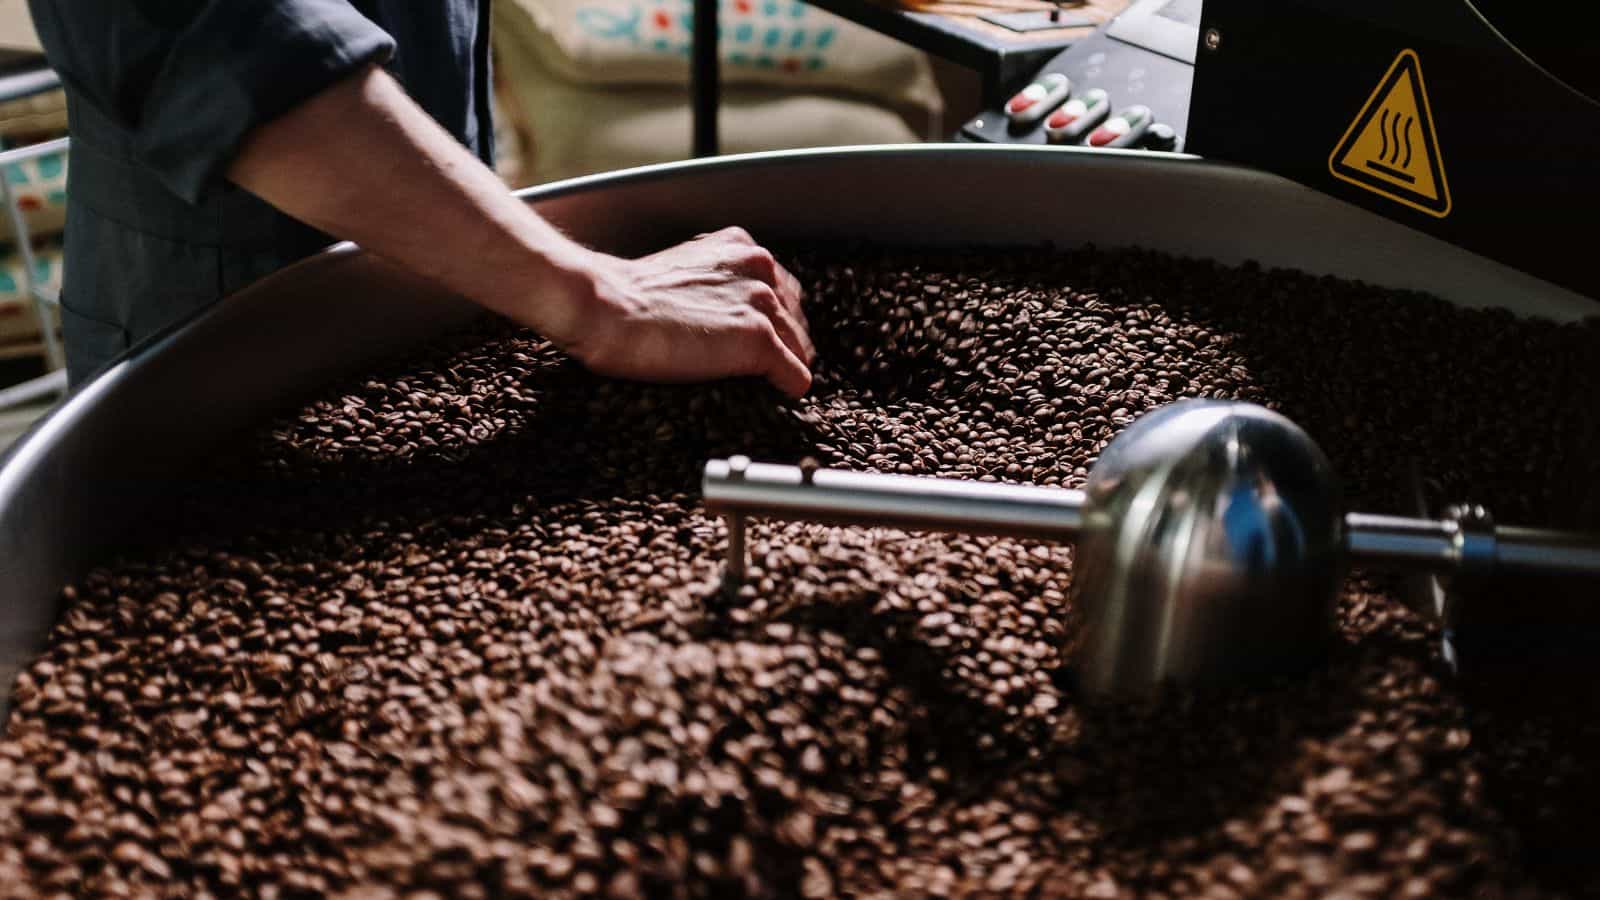 A worker conducting quality control of roasted coffee beans.